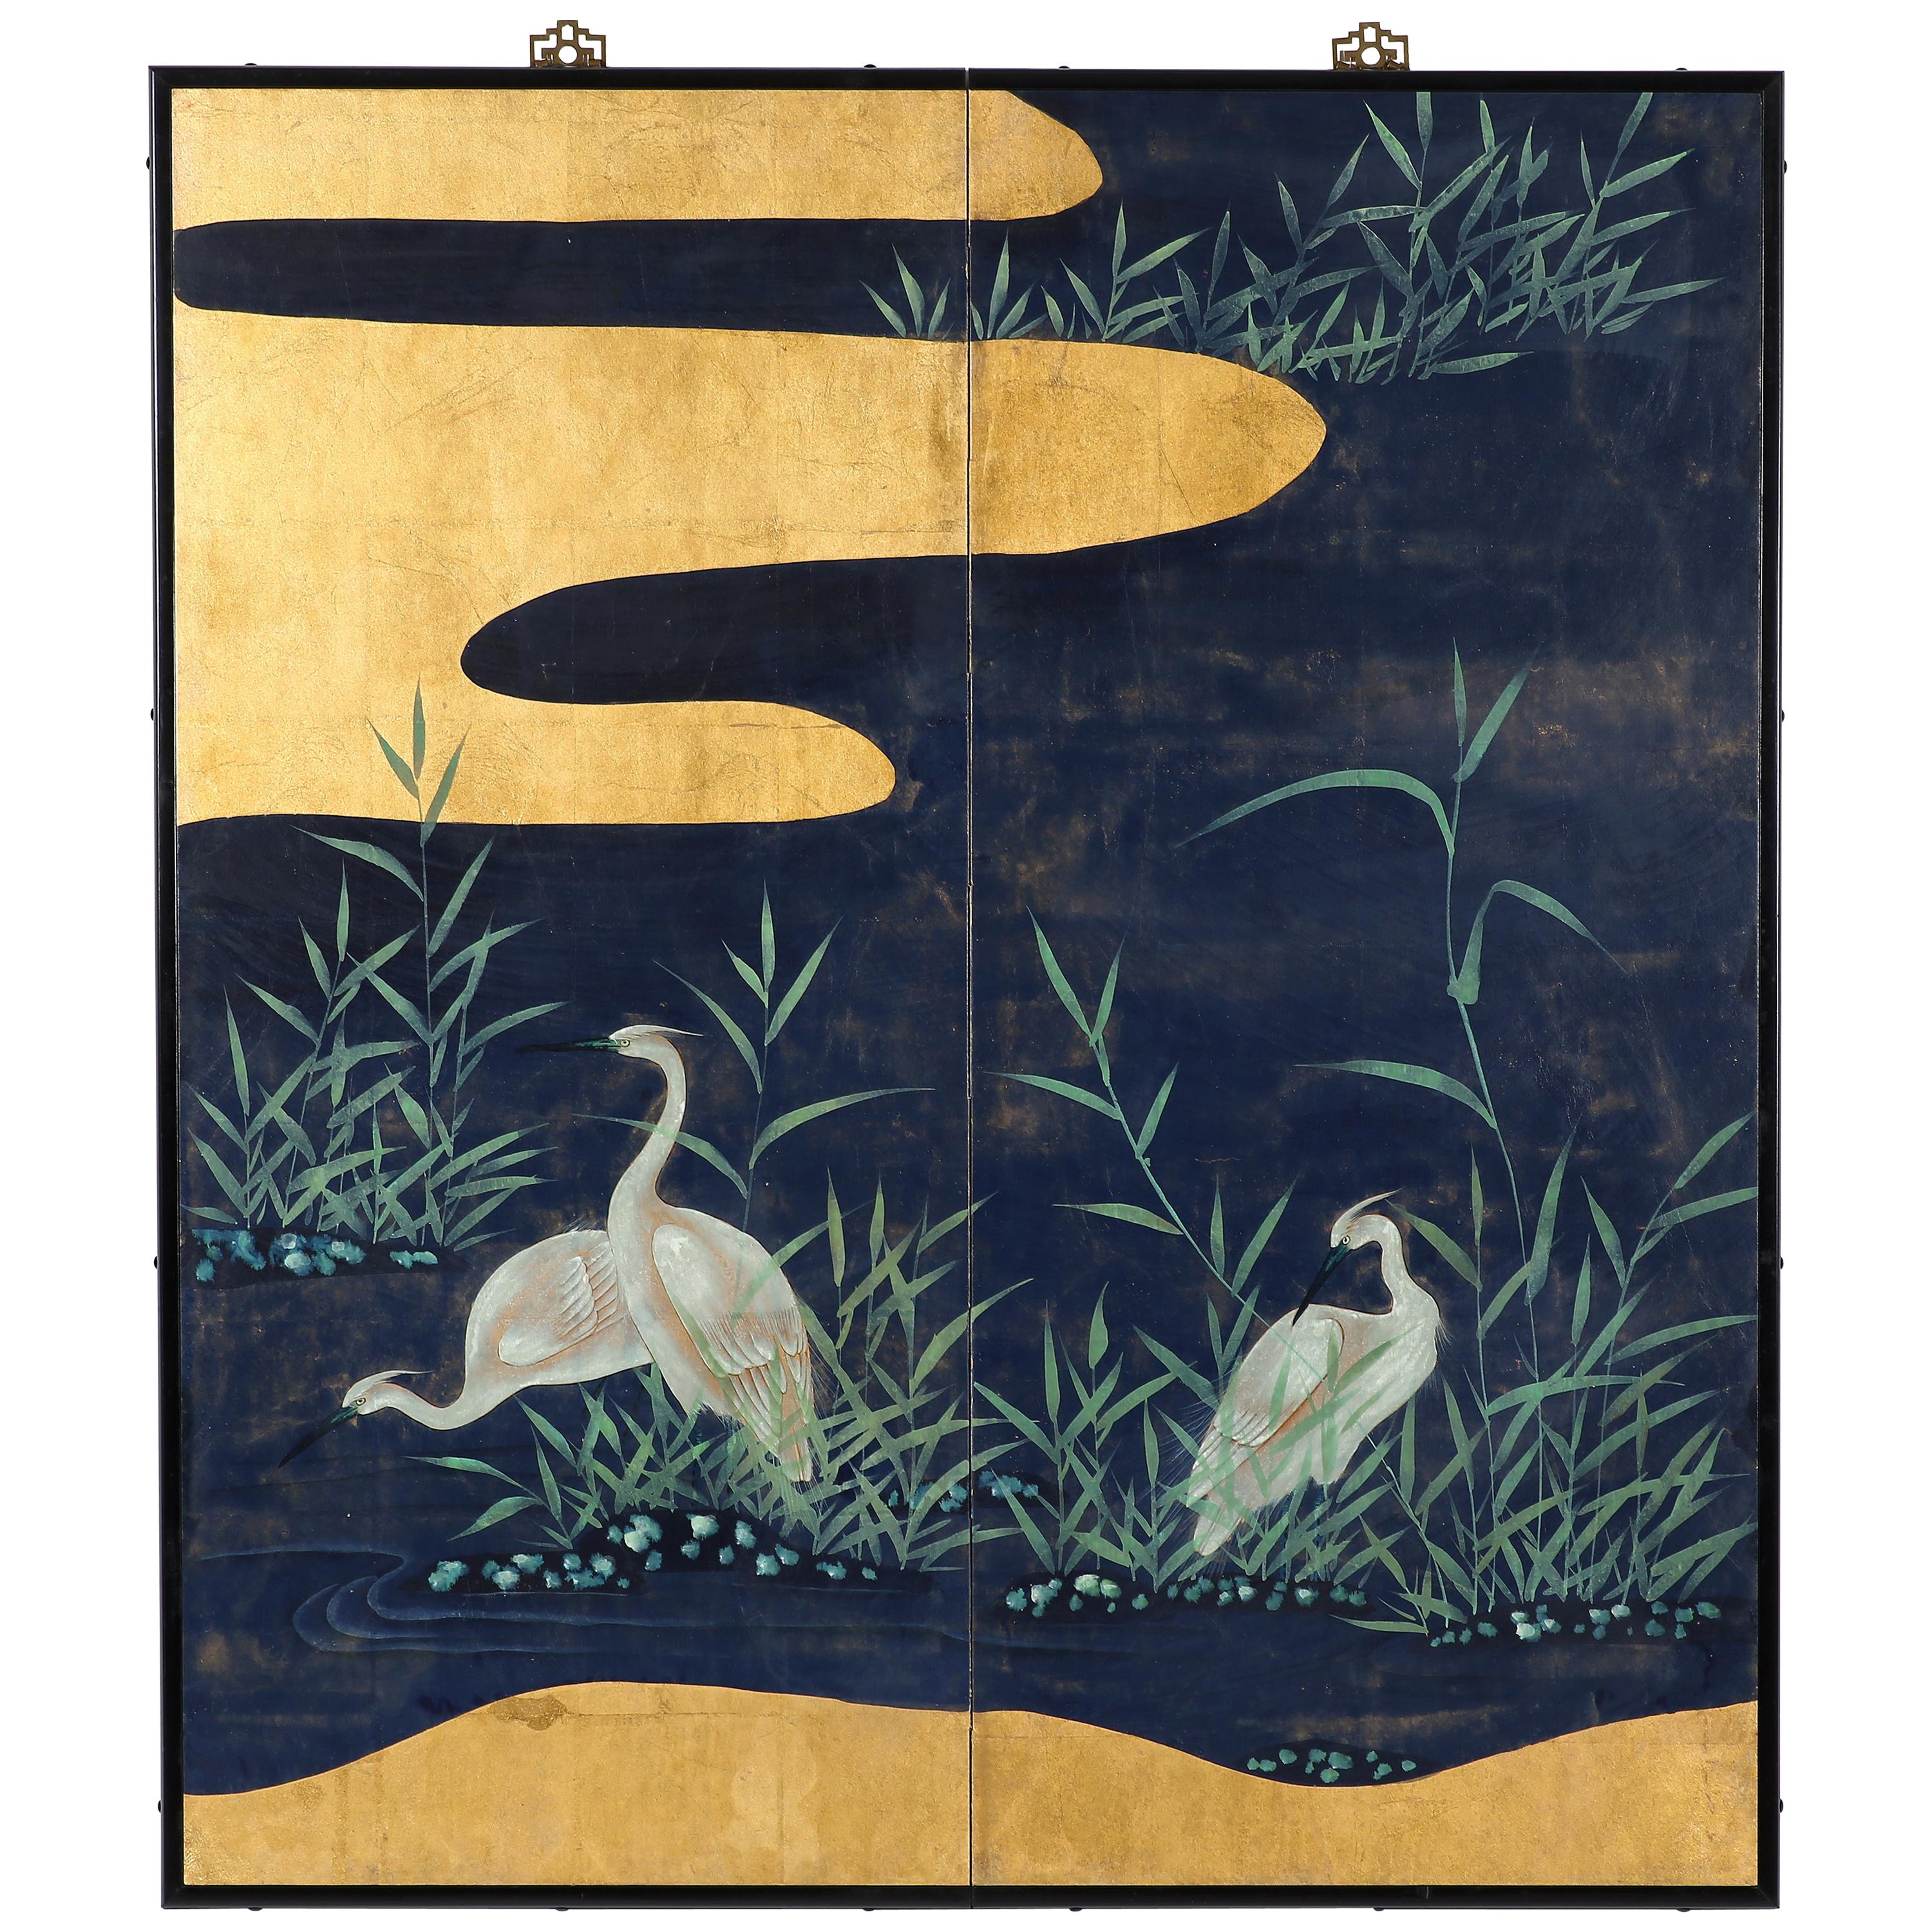 Hand Painted Japanese Folding Screen Byobu of Cranes by the Reeds